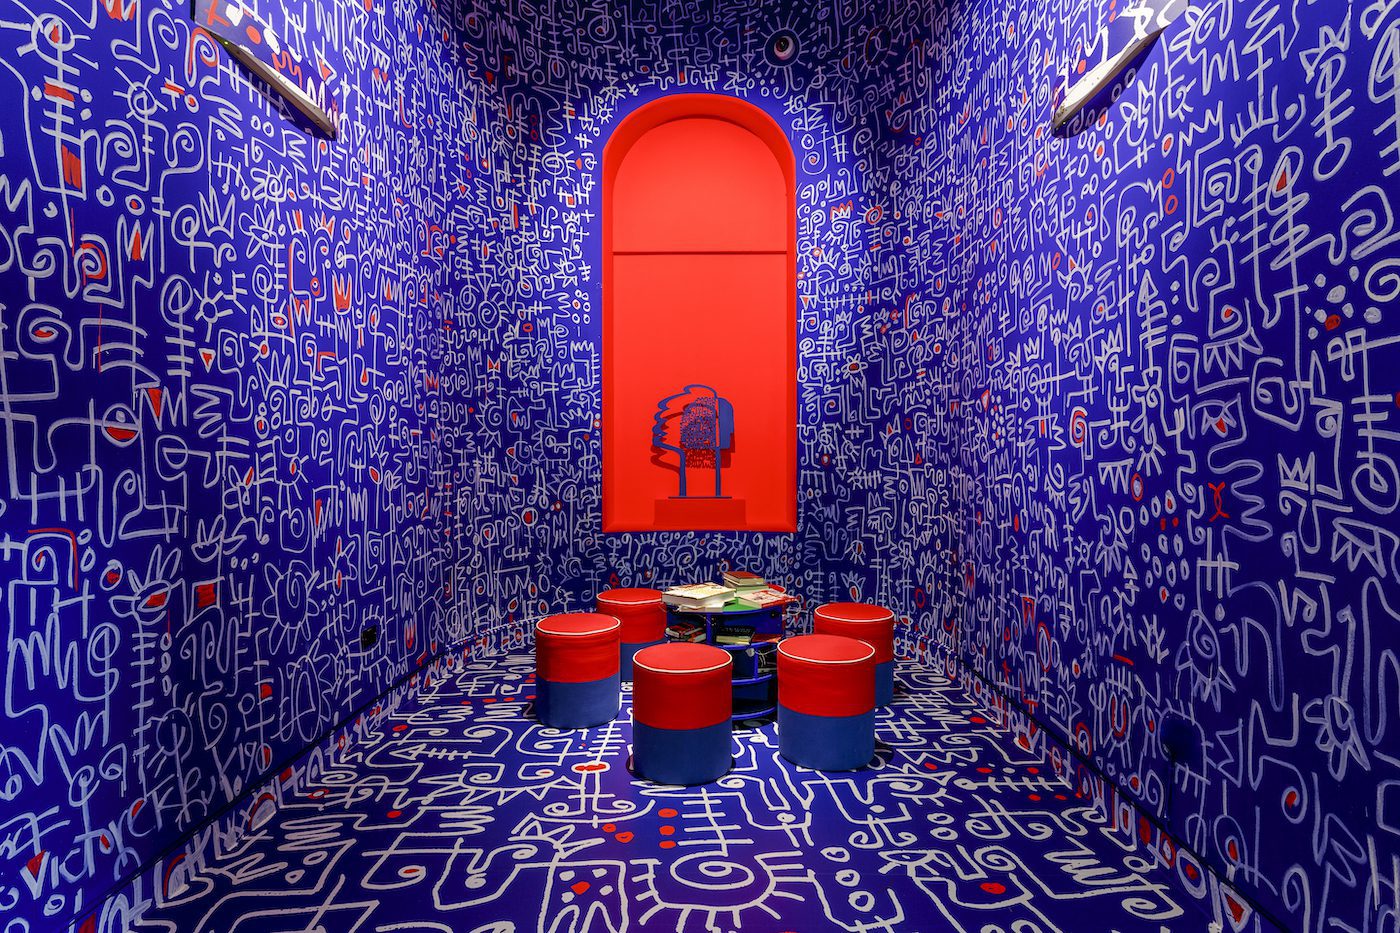 Victor Ekpuk, Shrine to Wisdom, Installation view at the exhibition Get Up, Stand Up Now at Somerset House from 12 Jun – 15 Sep 2019. Courtesy the artist.